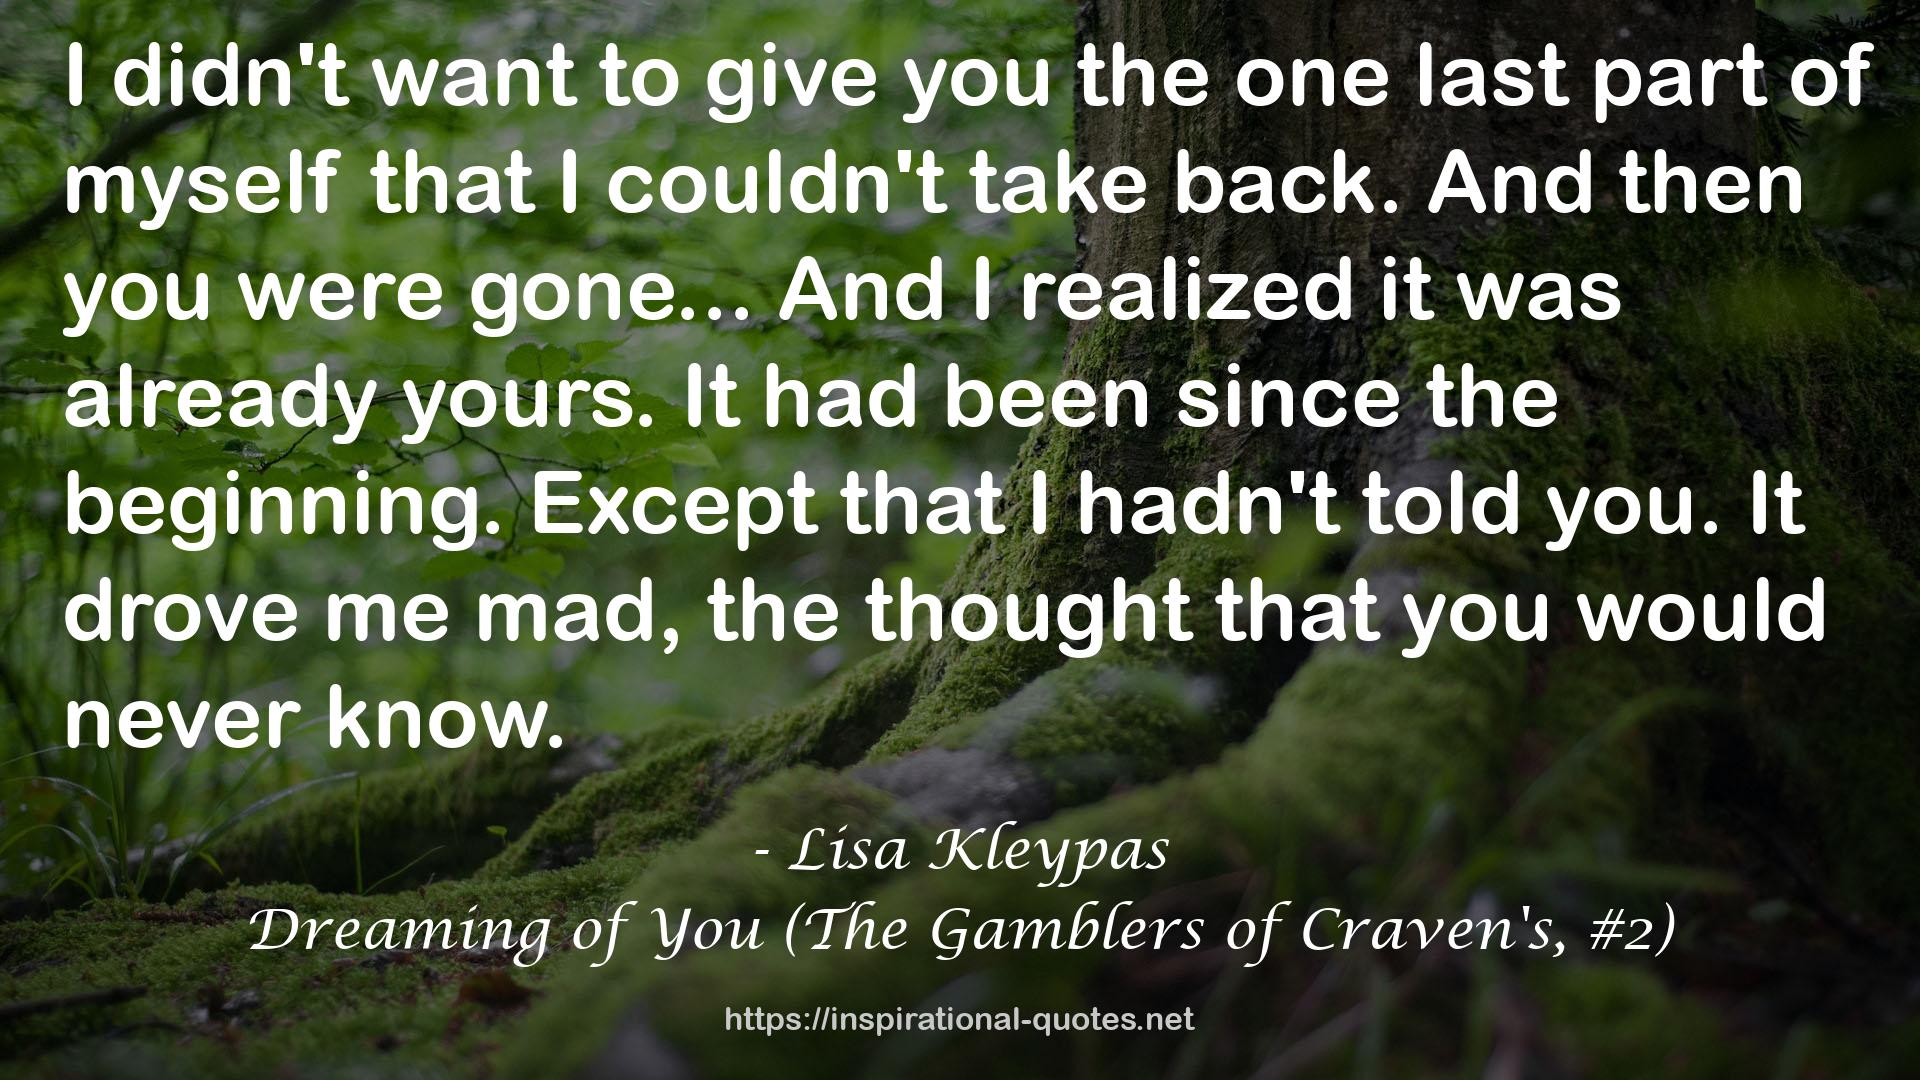 Dreaming of You (The Gamblers of Craven's, #2) QUOTES